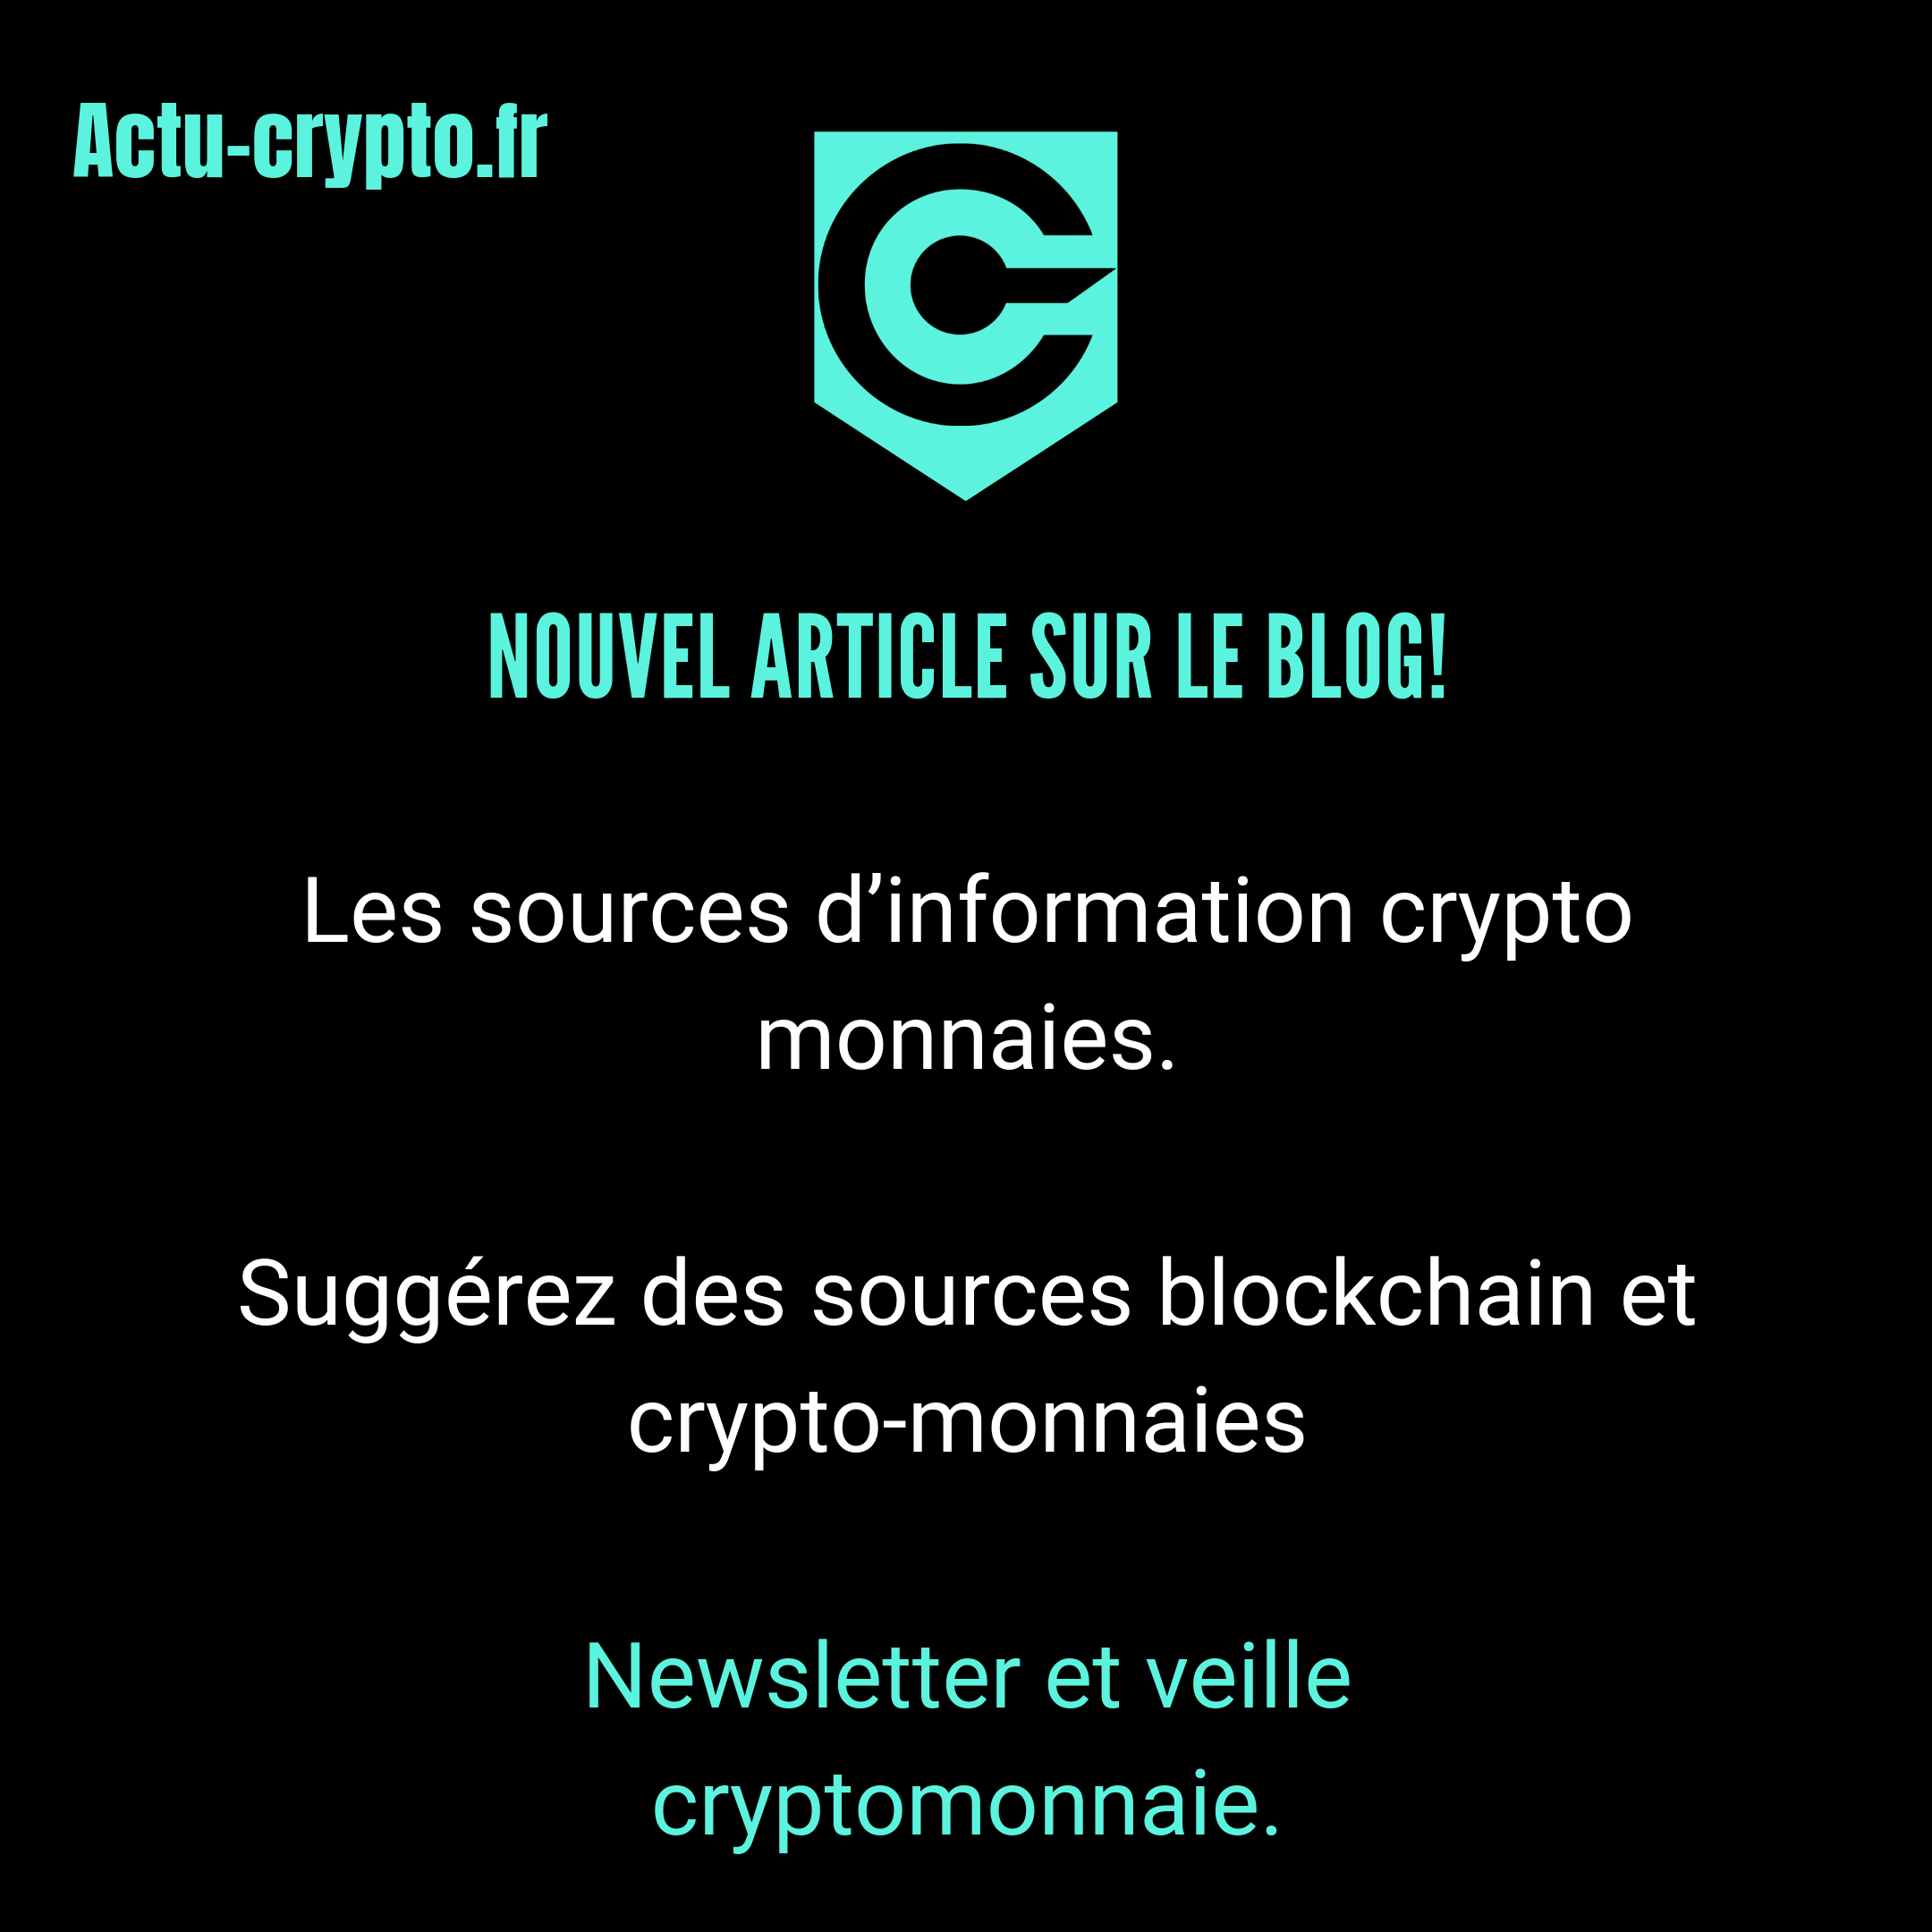 sources d'information crypto monnaies